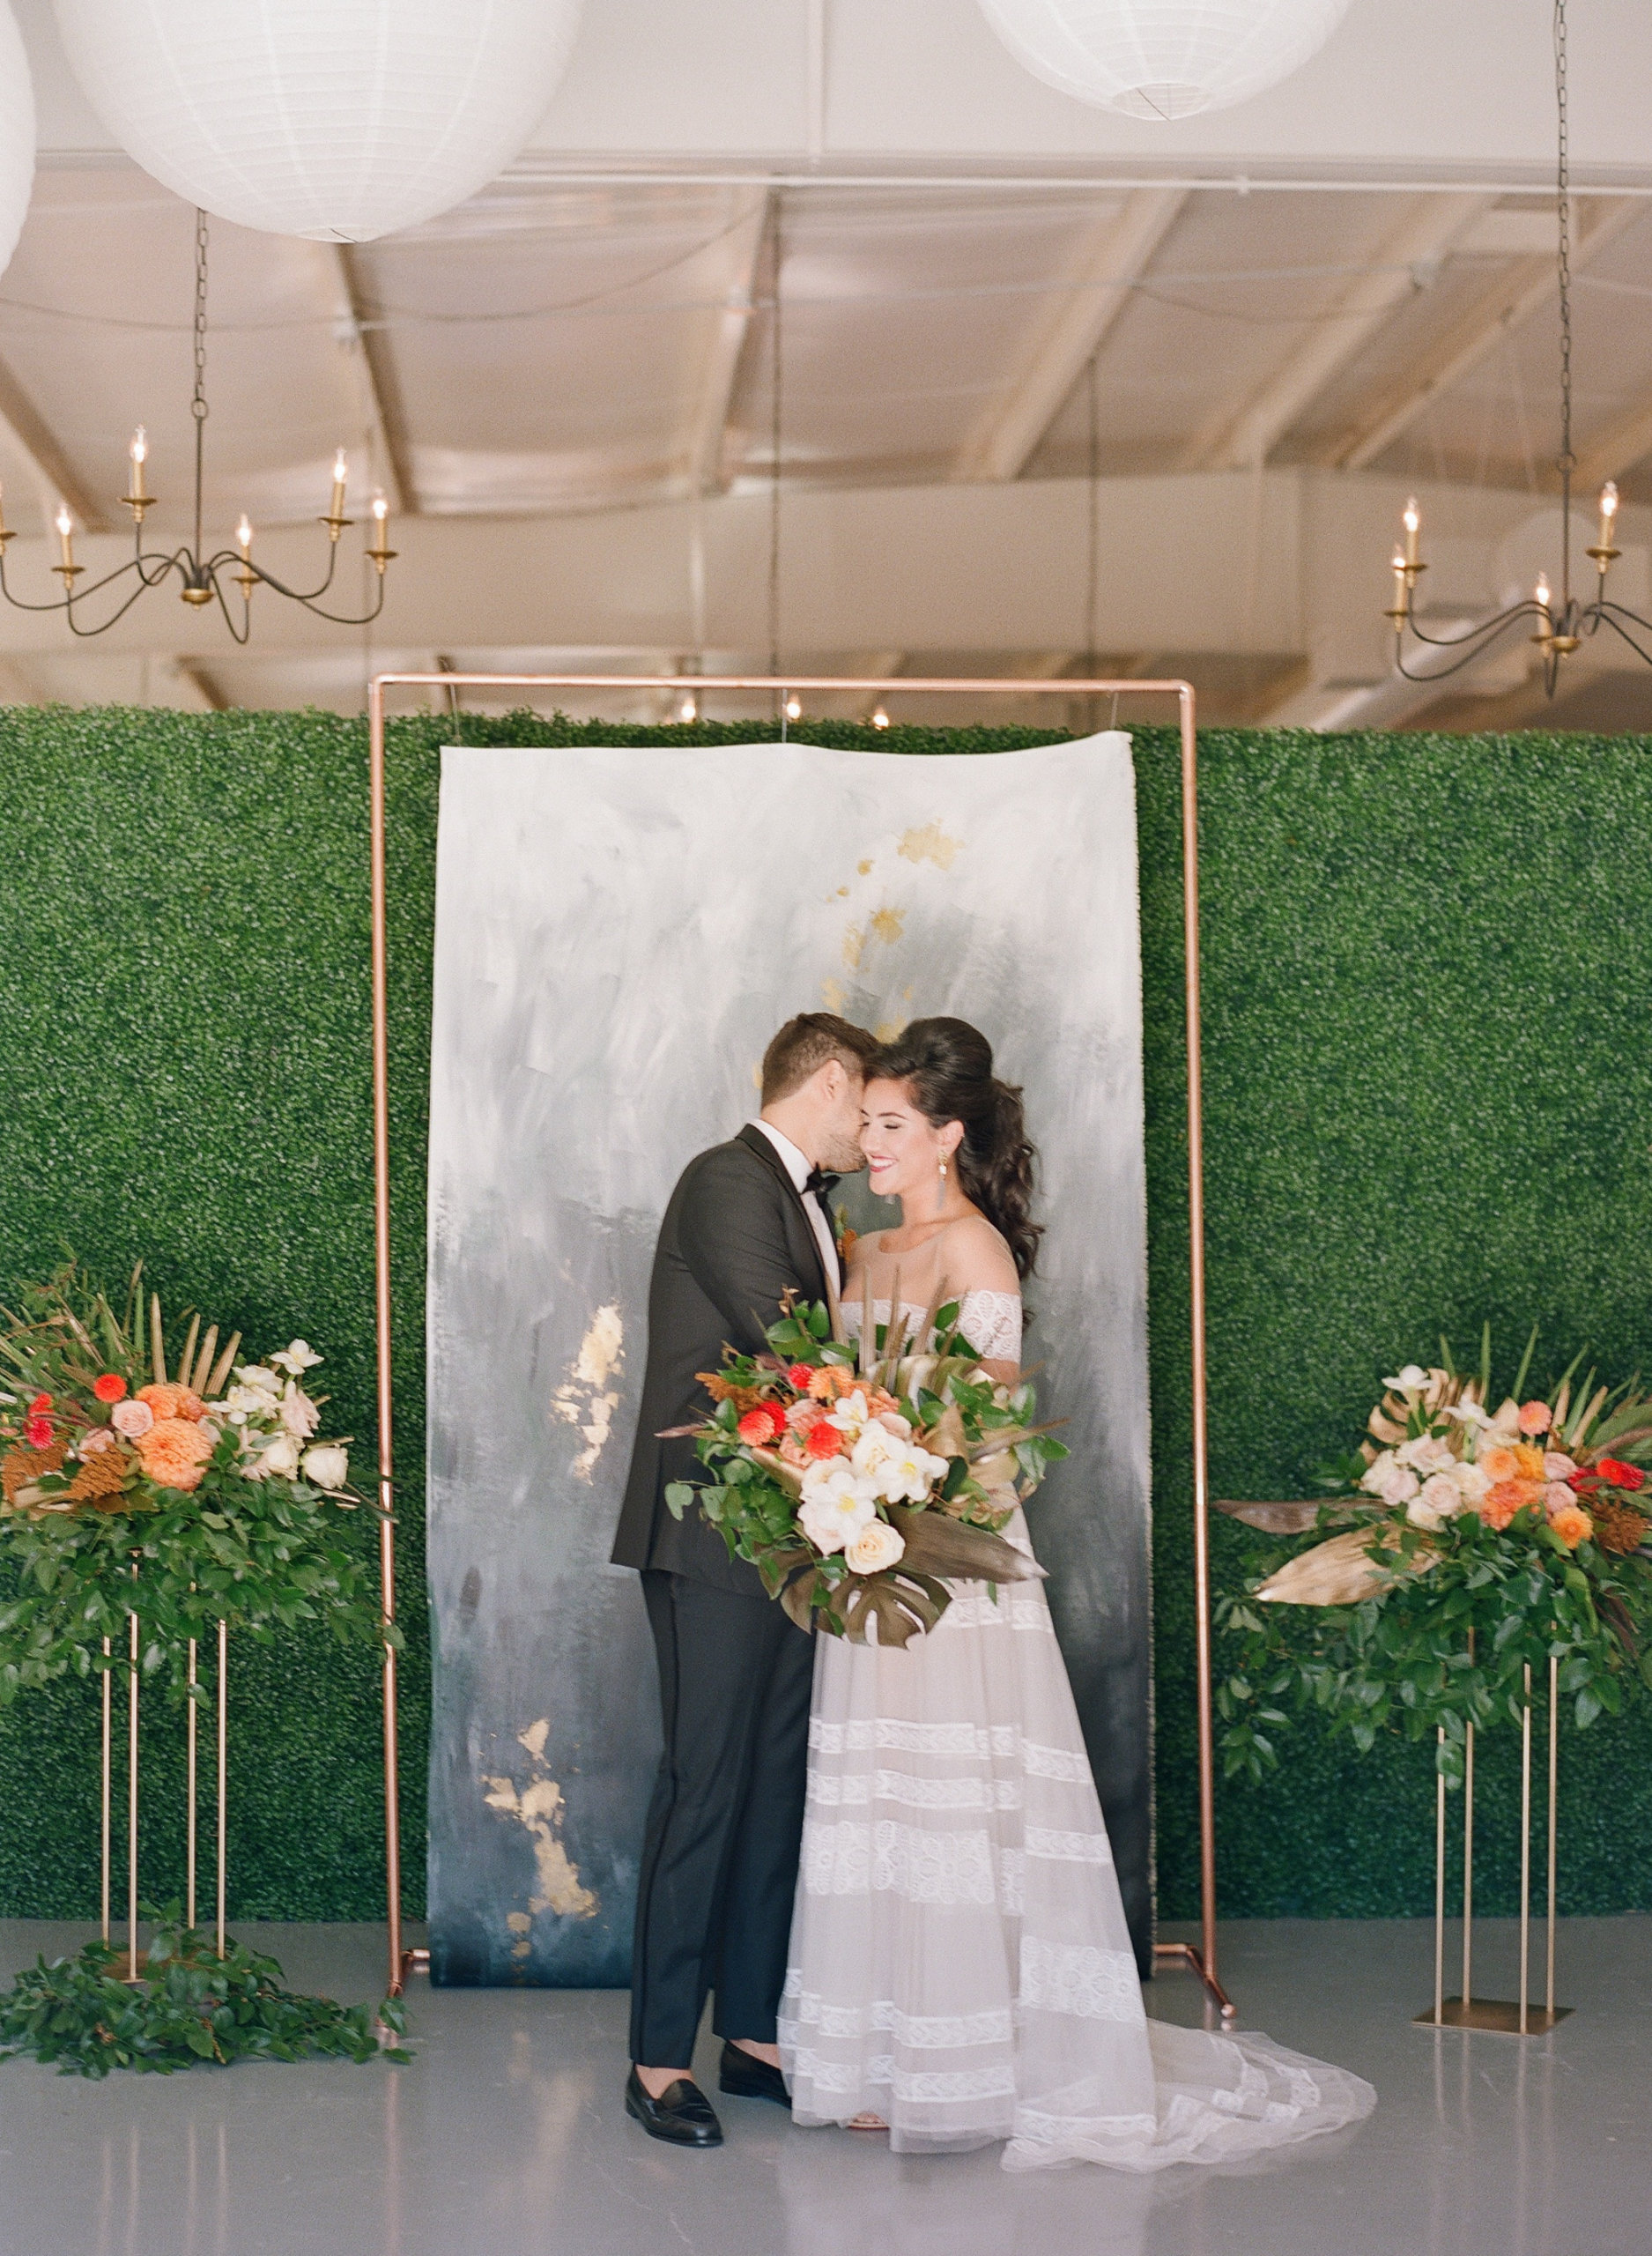 Bride and groom smiling in front of ceremony backdrop